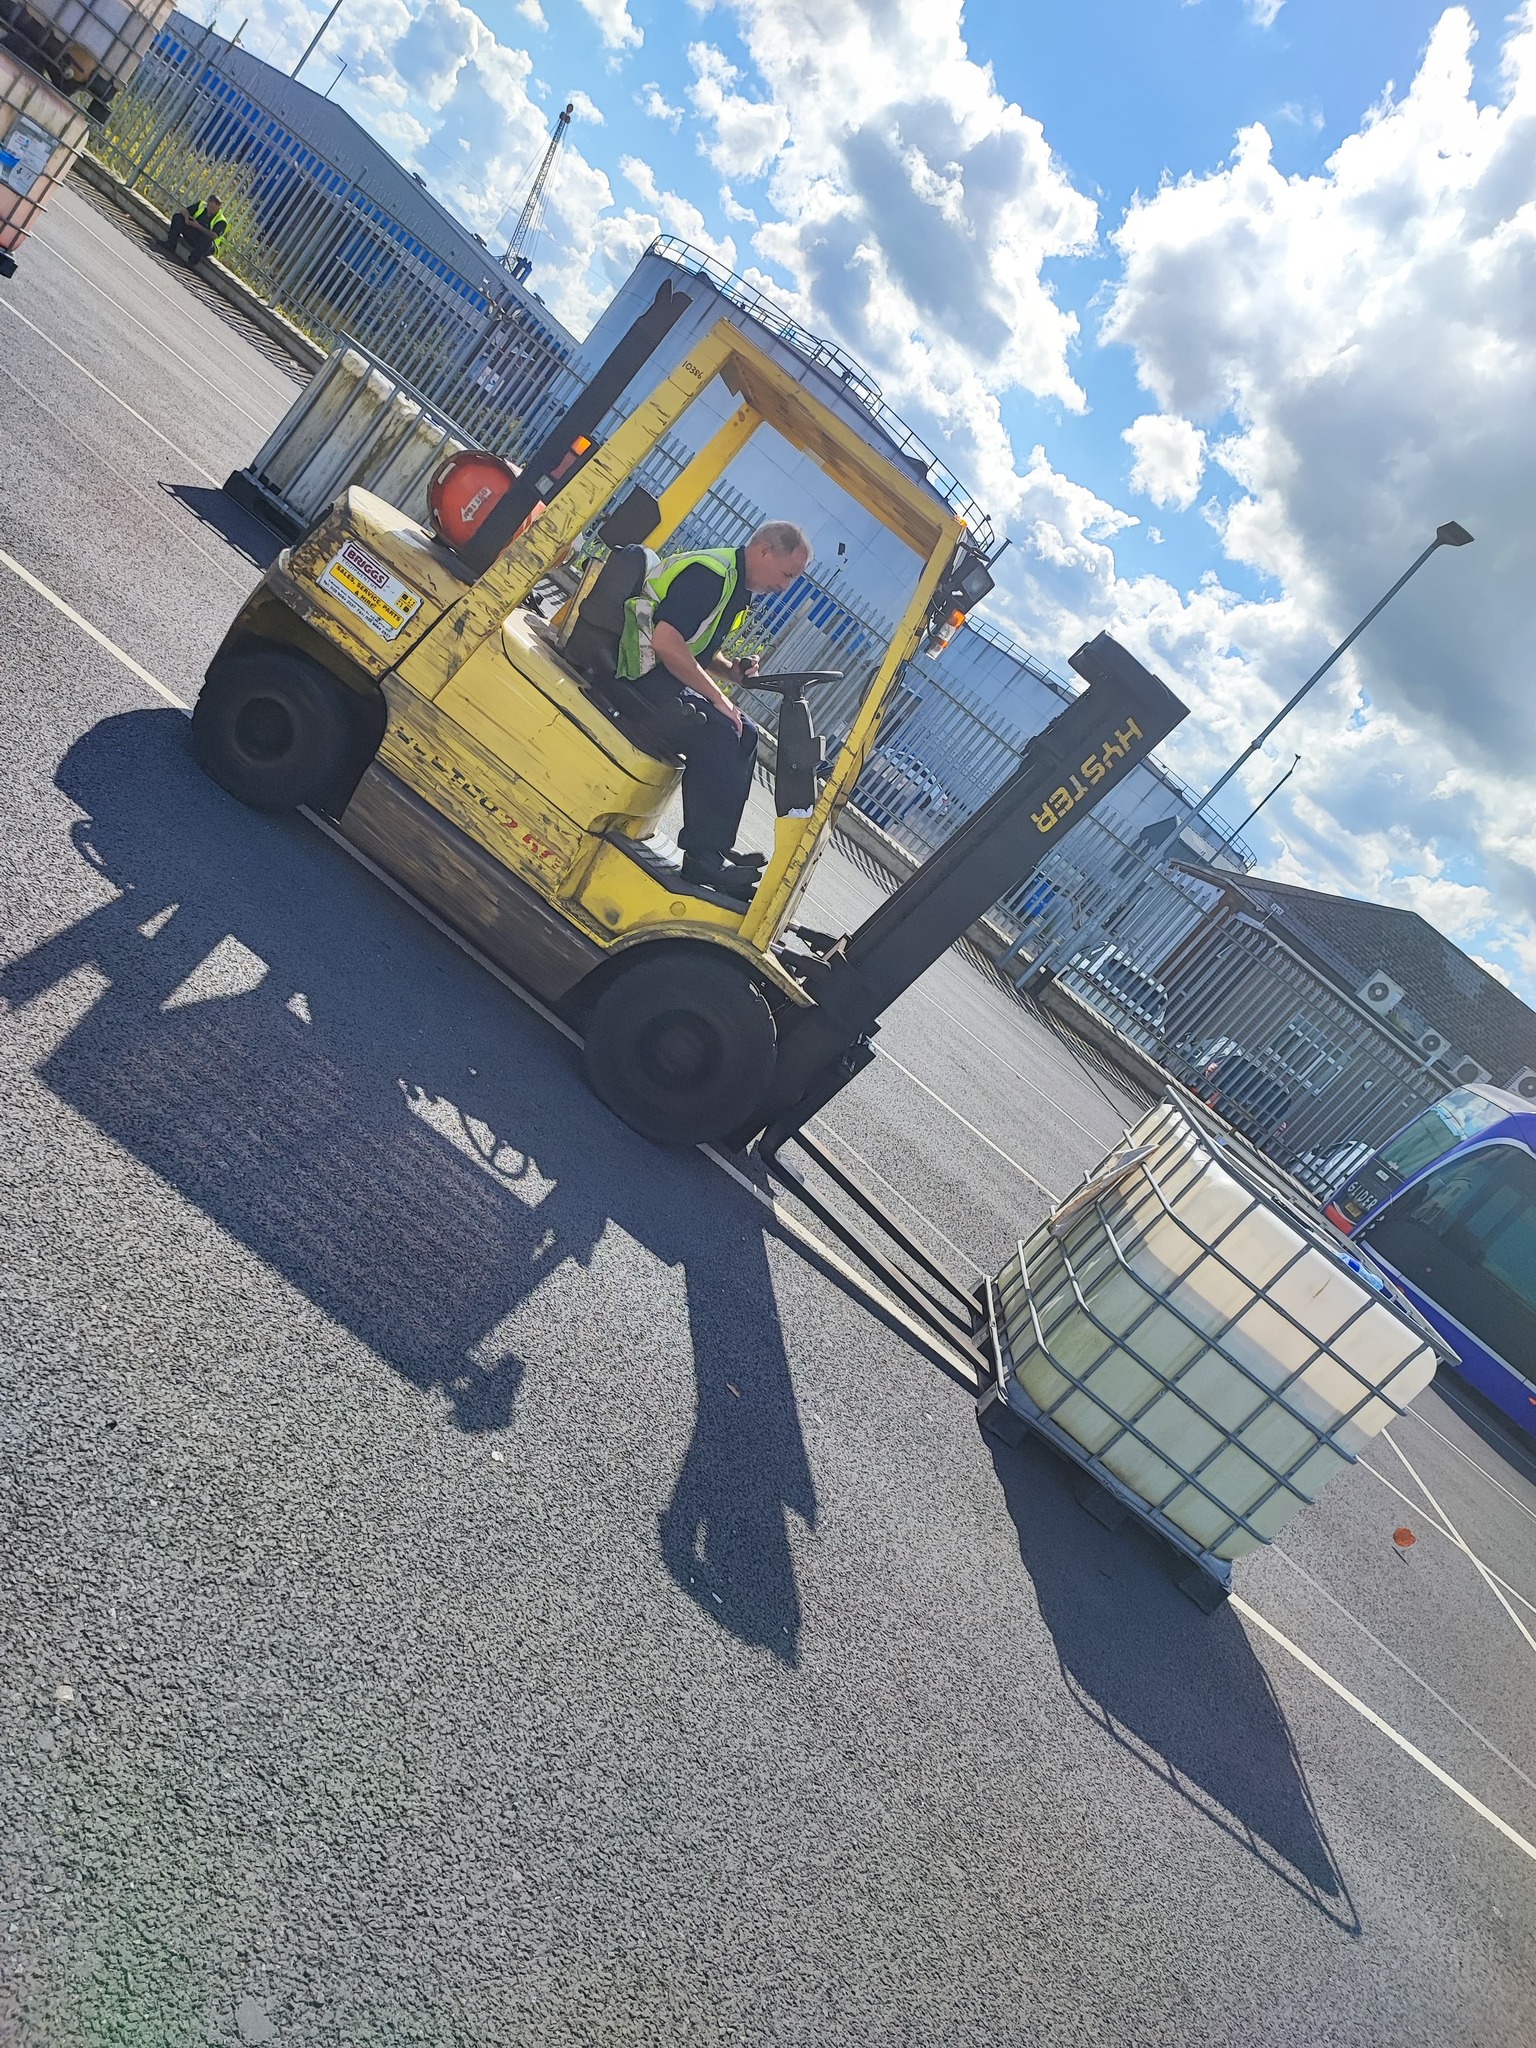 Low cost Forklift Training Courses In The Uk - All Lift Trucks